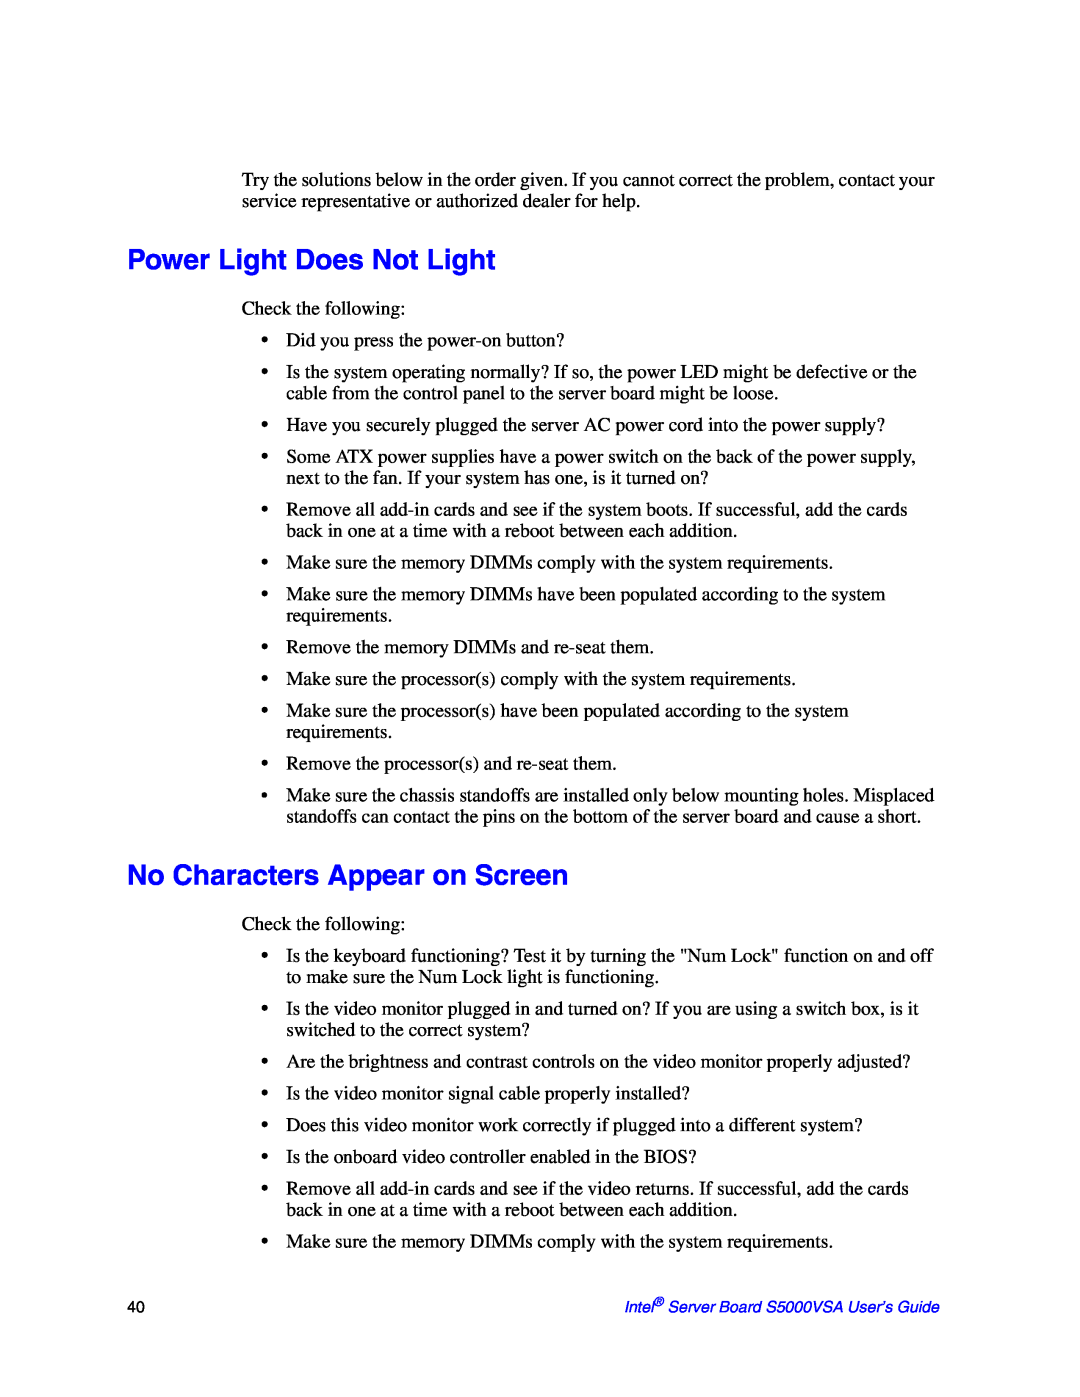 Intel S5000VSA manual Power Light Does Not Light, No Characters Appear on Screen 